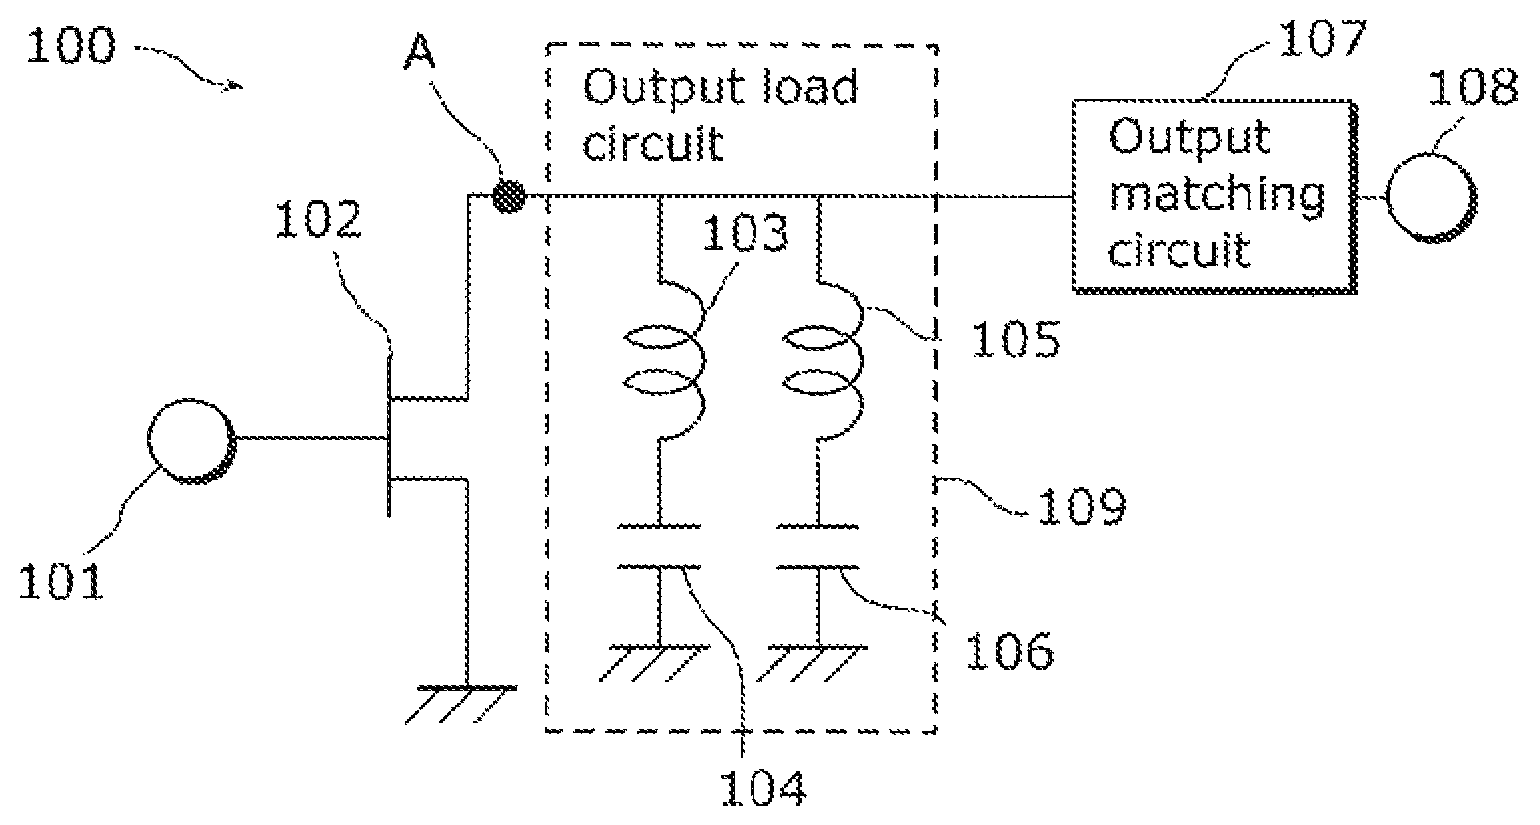 Radio frequency power amplifier